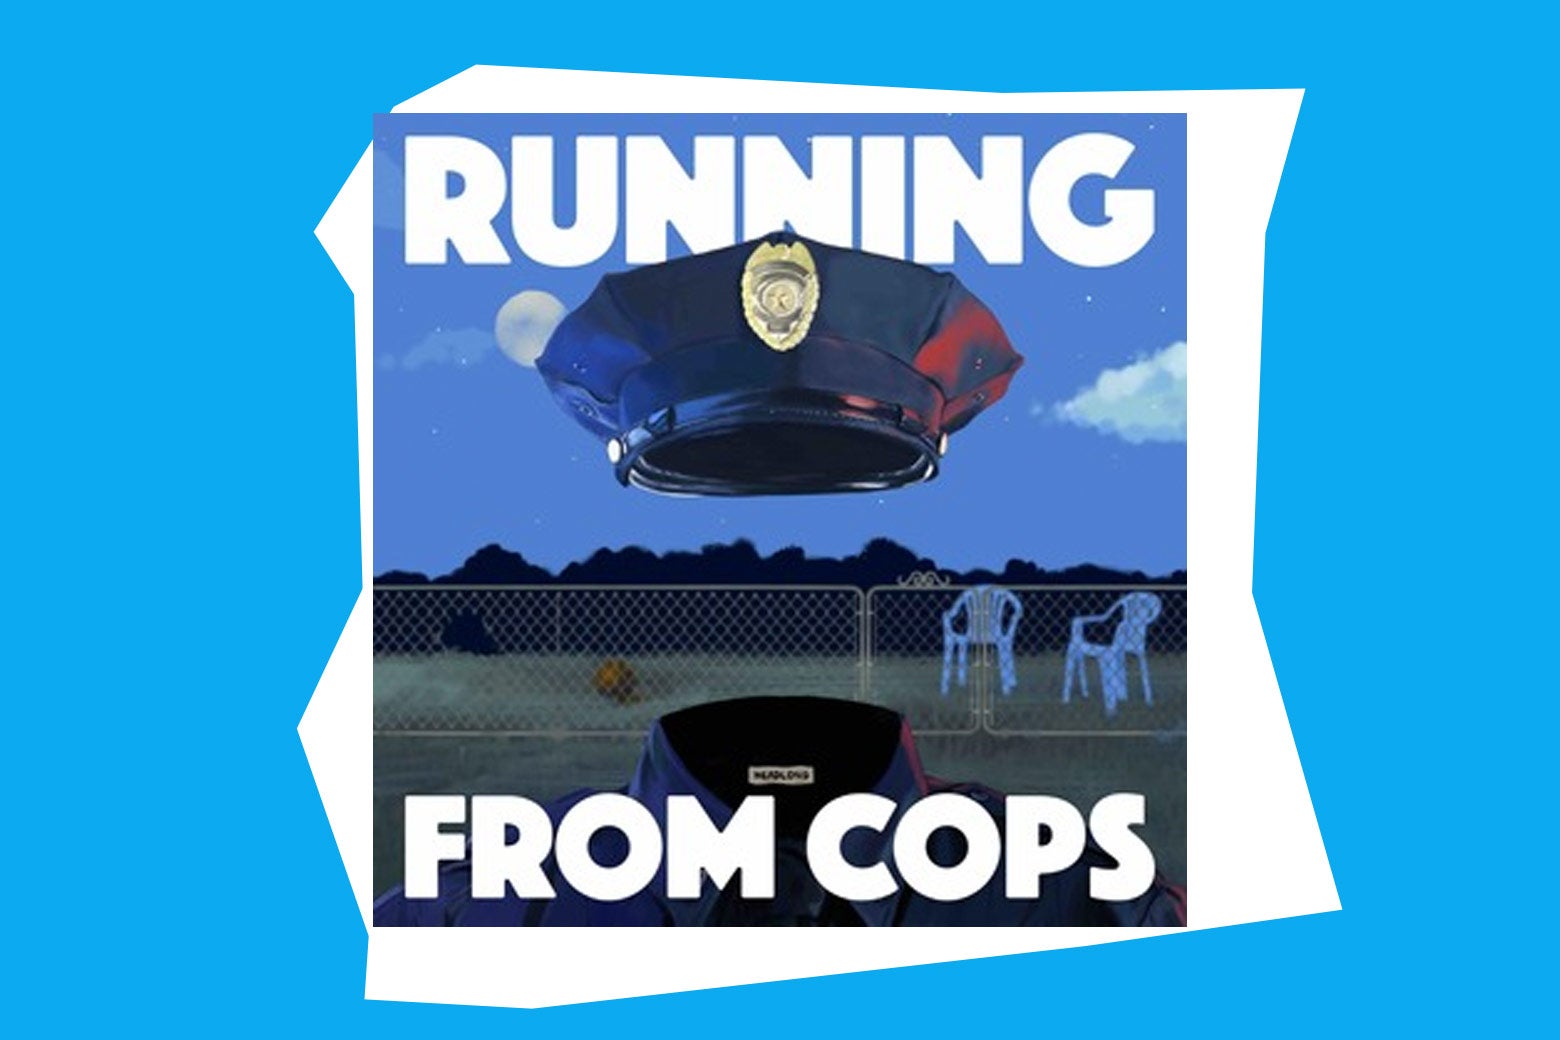 The podcast tile for Running From Cops on a blue background.